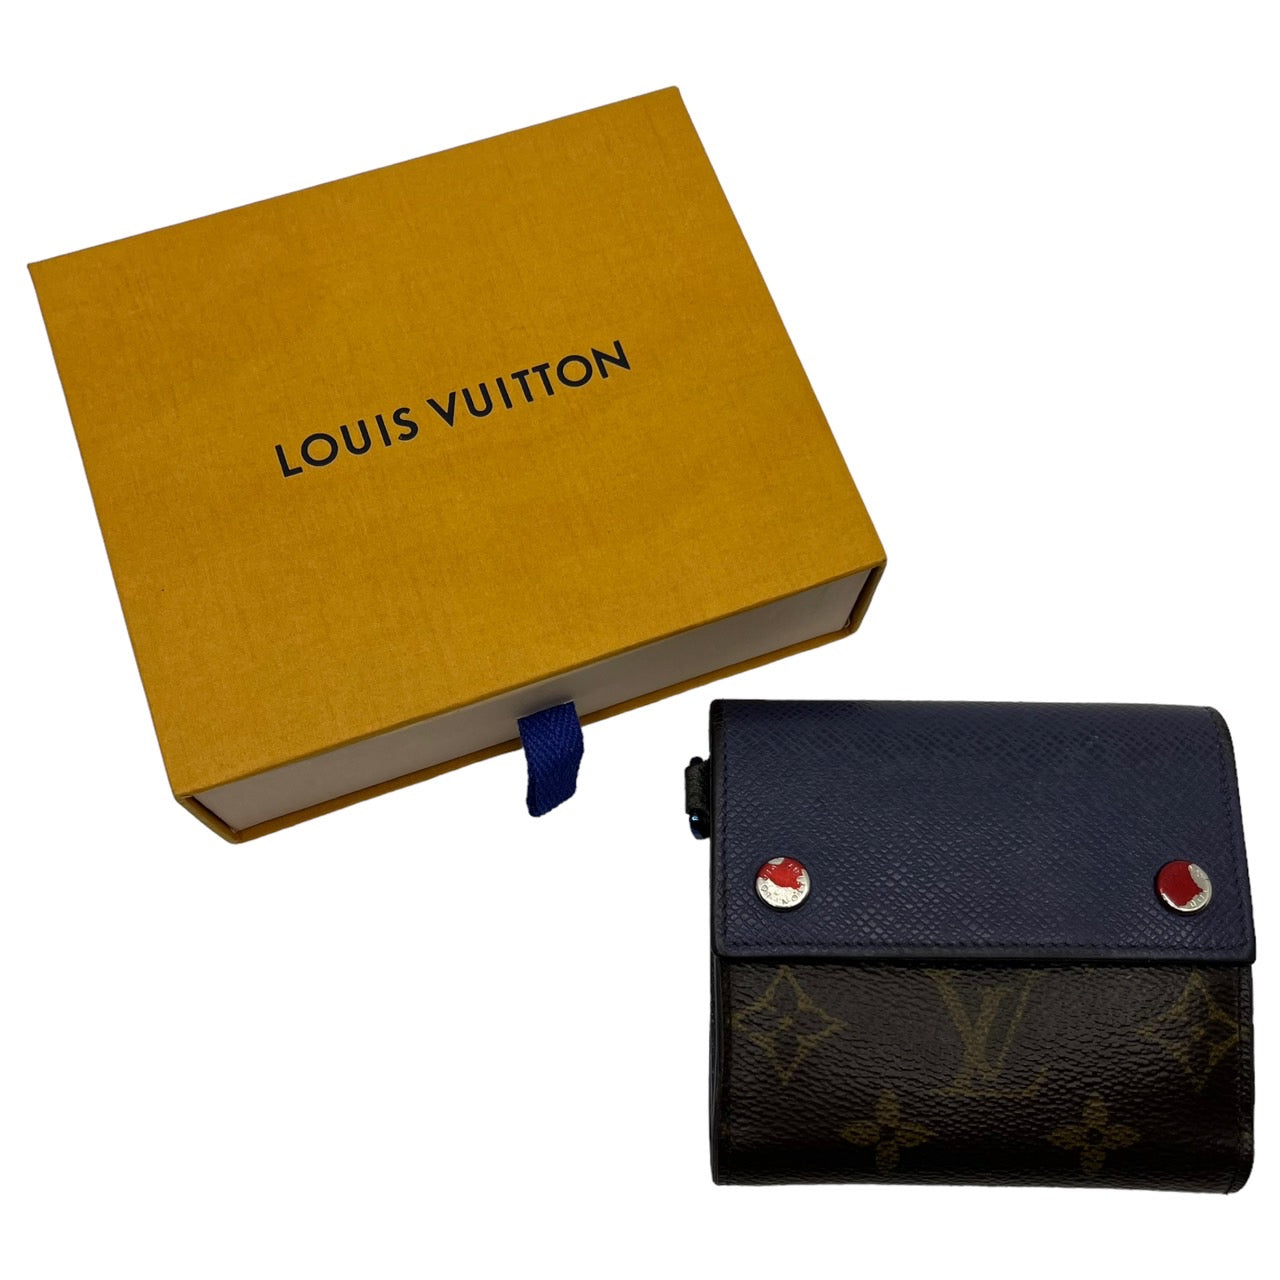 LOUIS VUITTON(ルイヴィトン) 18SS コンパクト・ウォレット by キム 